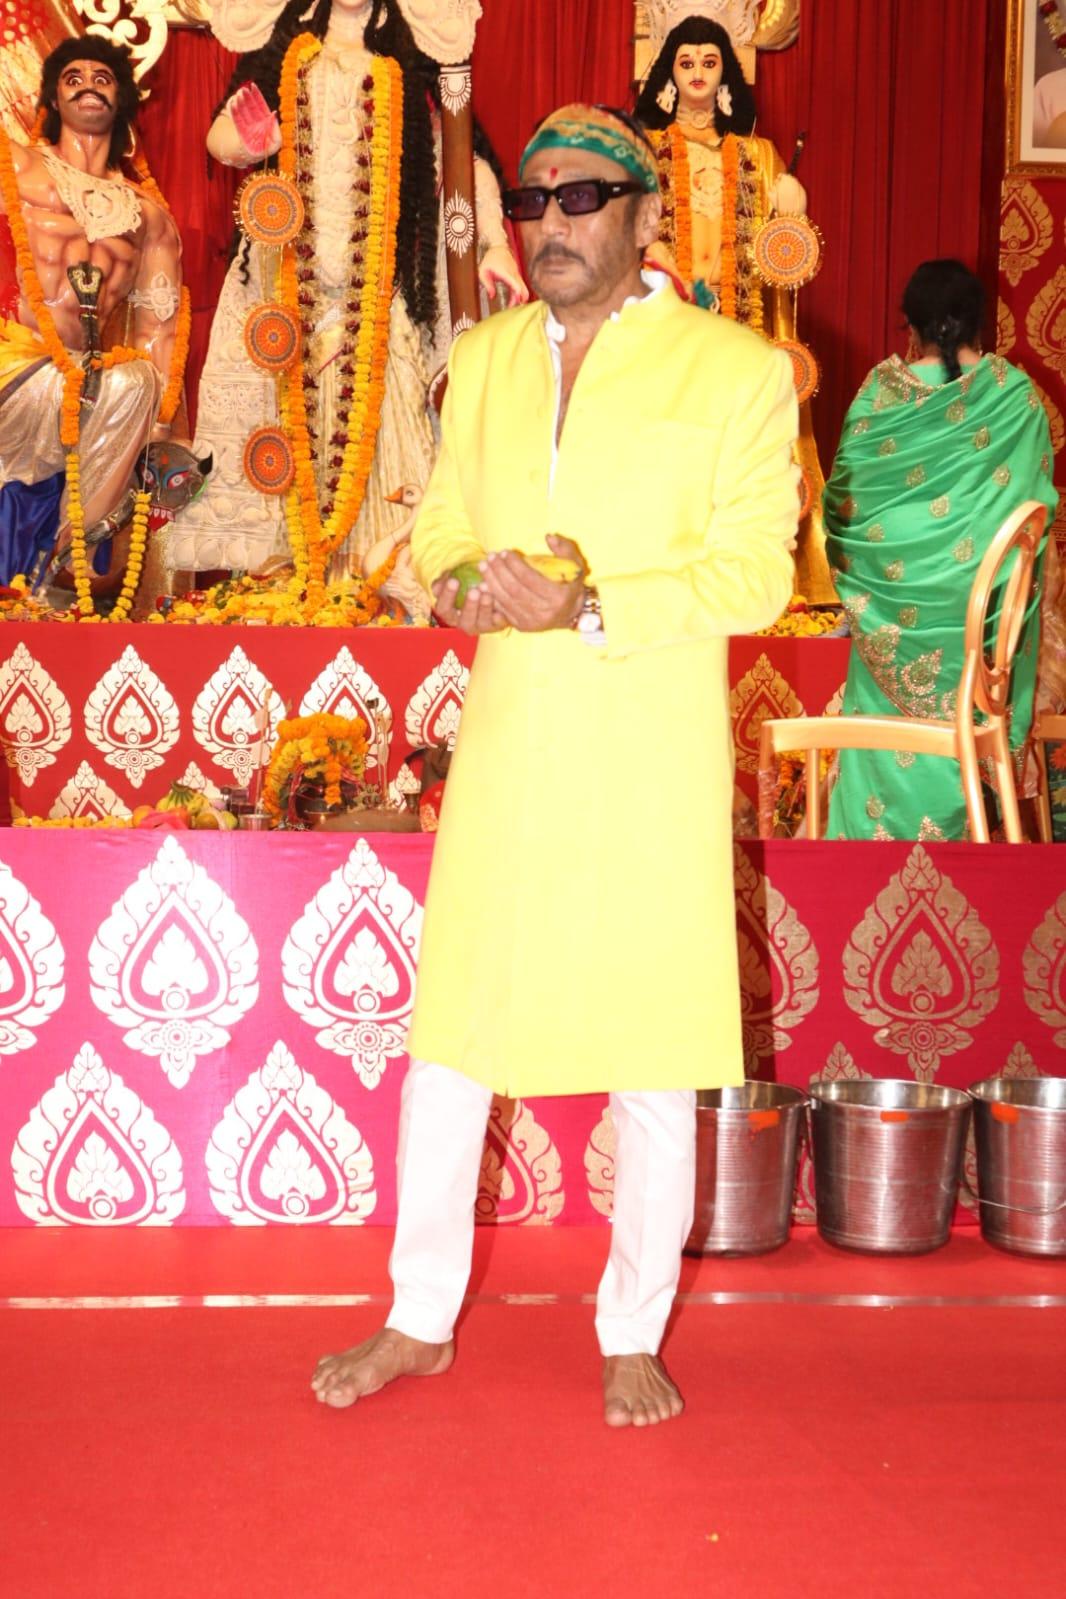 Jackie Shroff was also spotted at the puja pandal